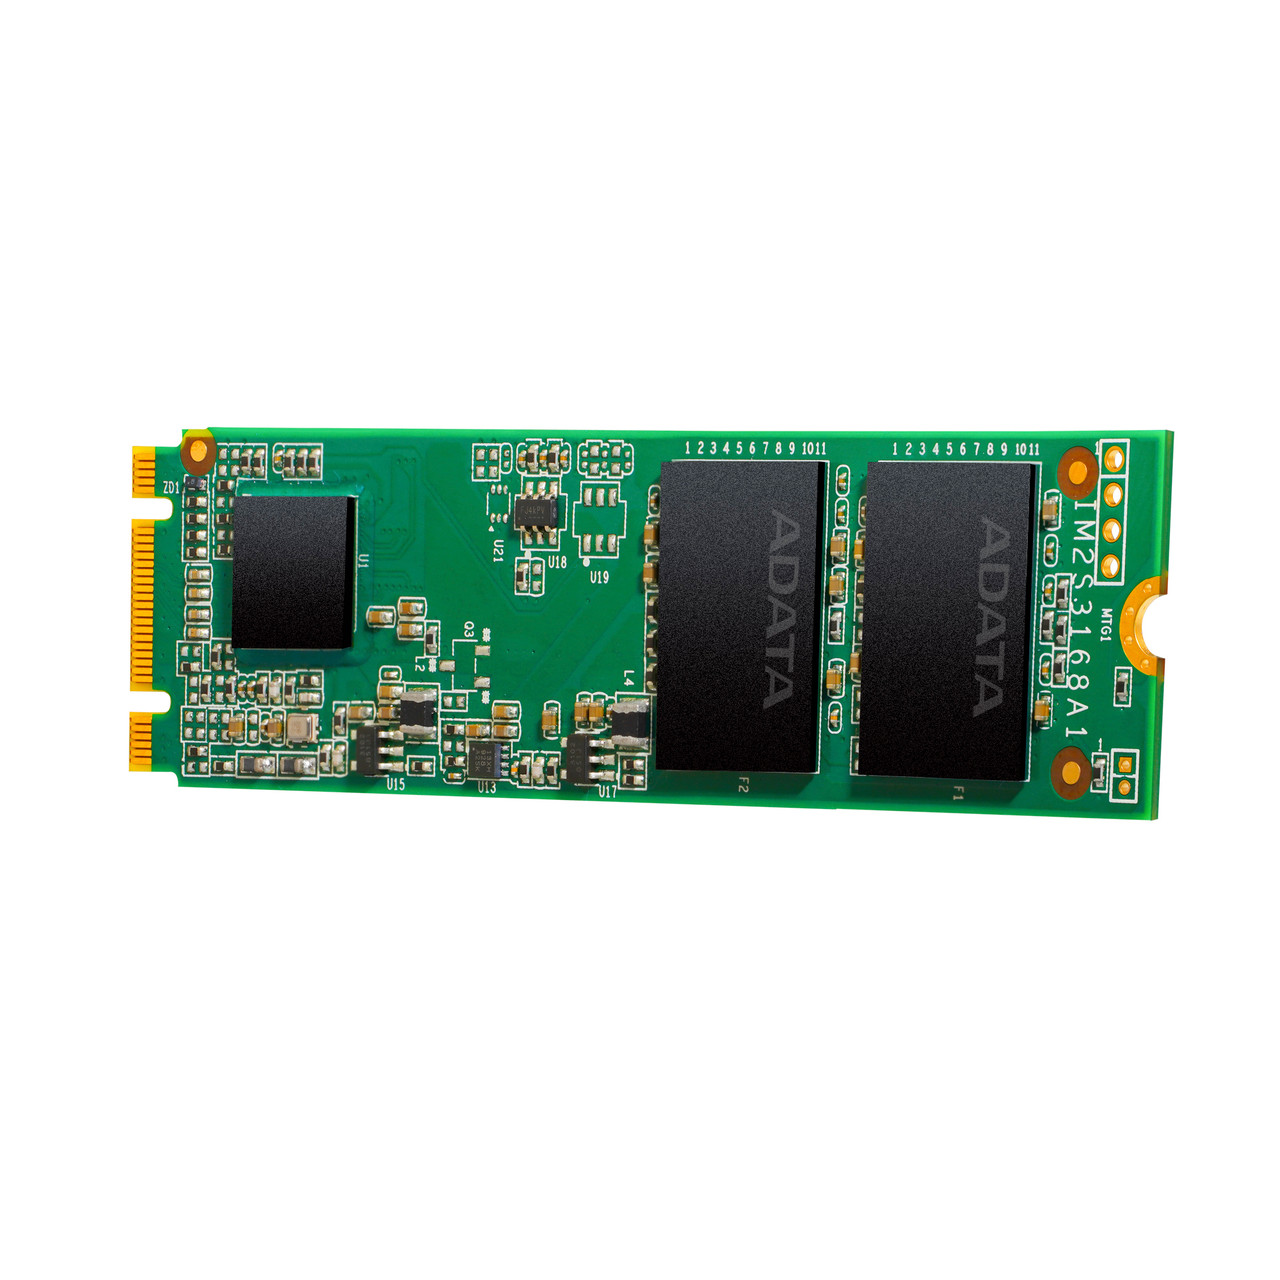 ADATA Ultimate Series: SU650 120GB SATA M.2 2280 Internal Solid State Drive  | SU650NS38 | 3D NAND - Green SSD | Up to 550MBps - 1PK - ADATA